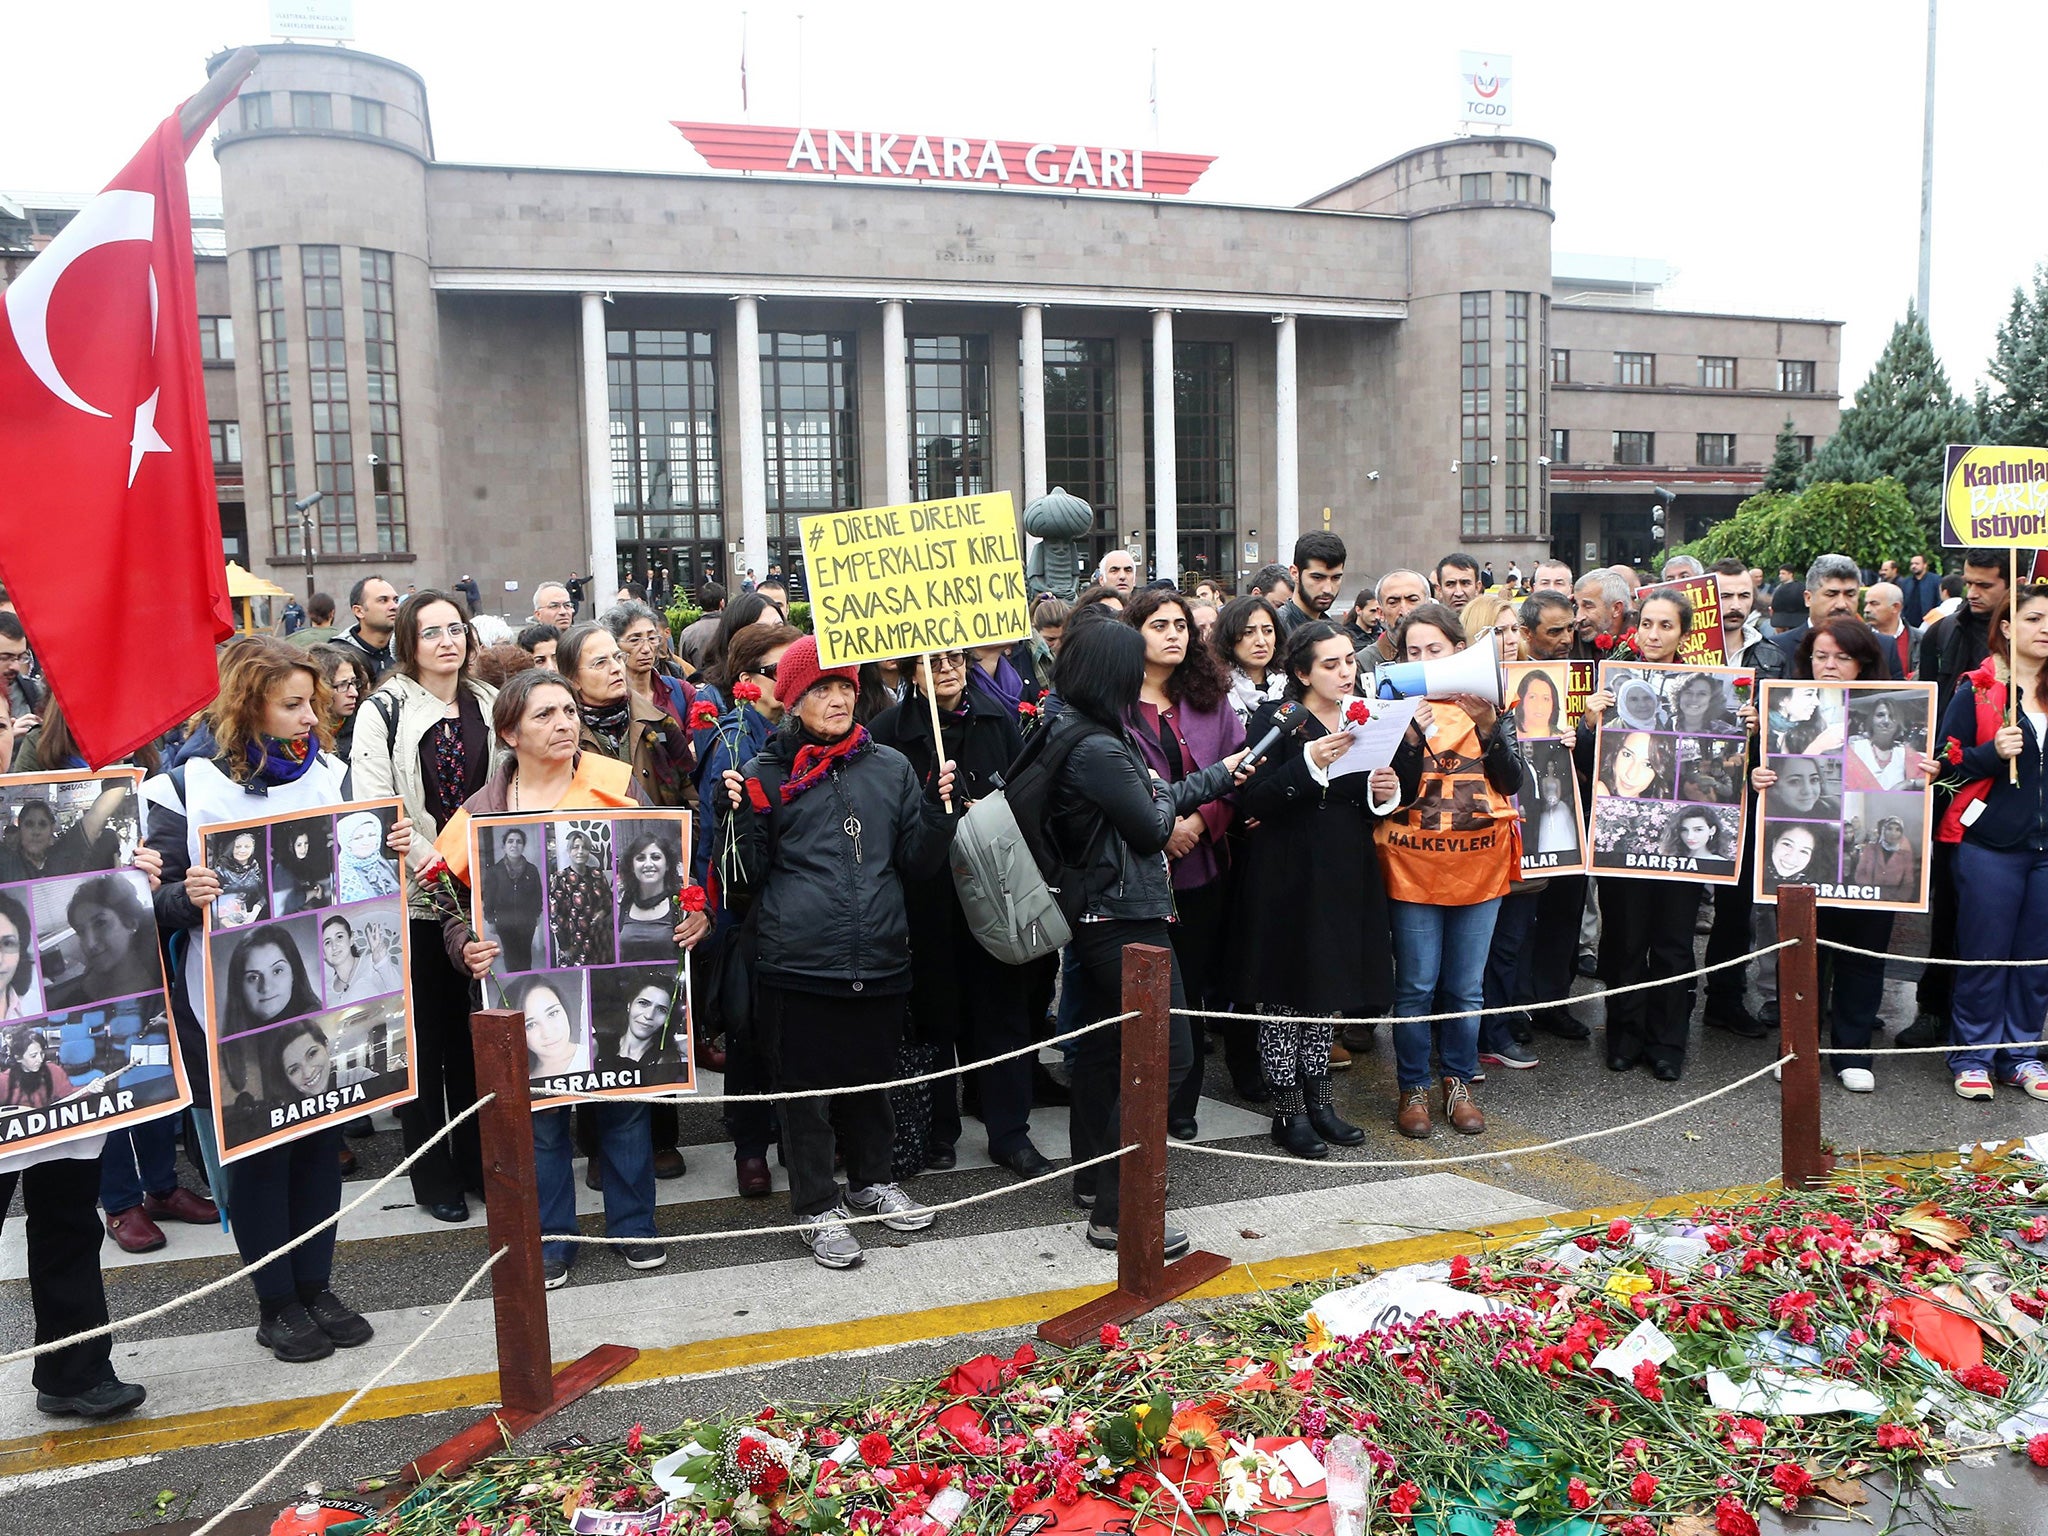 Mourners in Ankara hold images of victims and banners as they gather at the site of twin explosions that killed 102 people